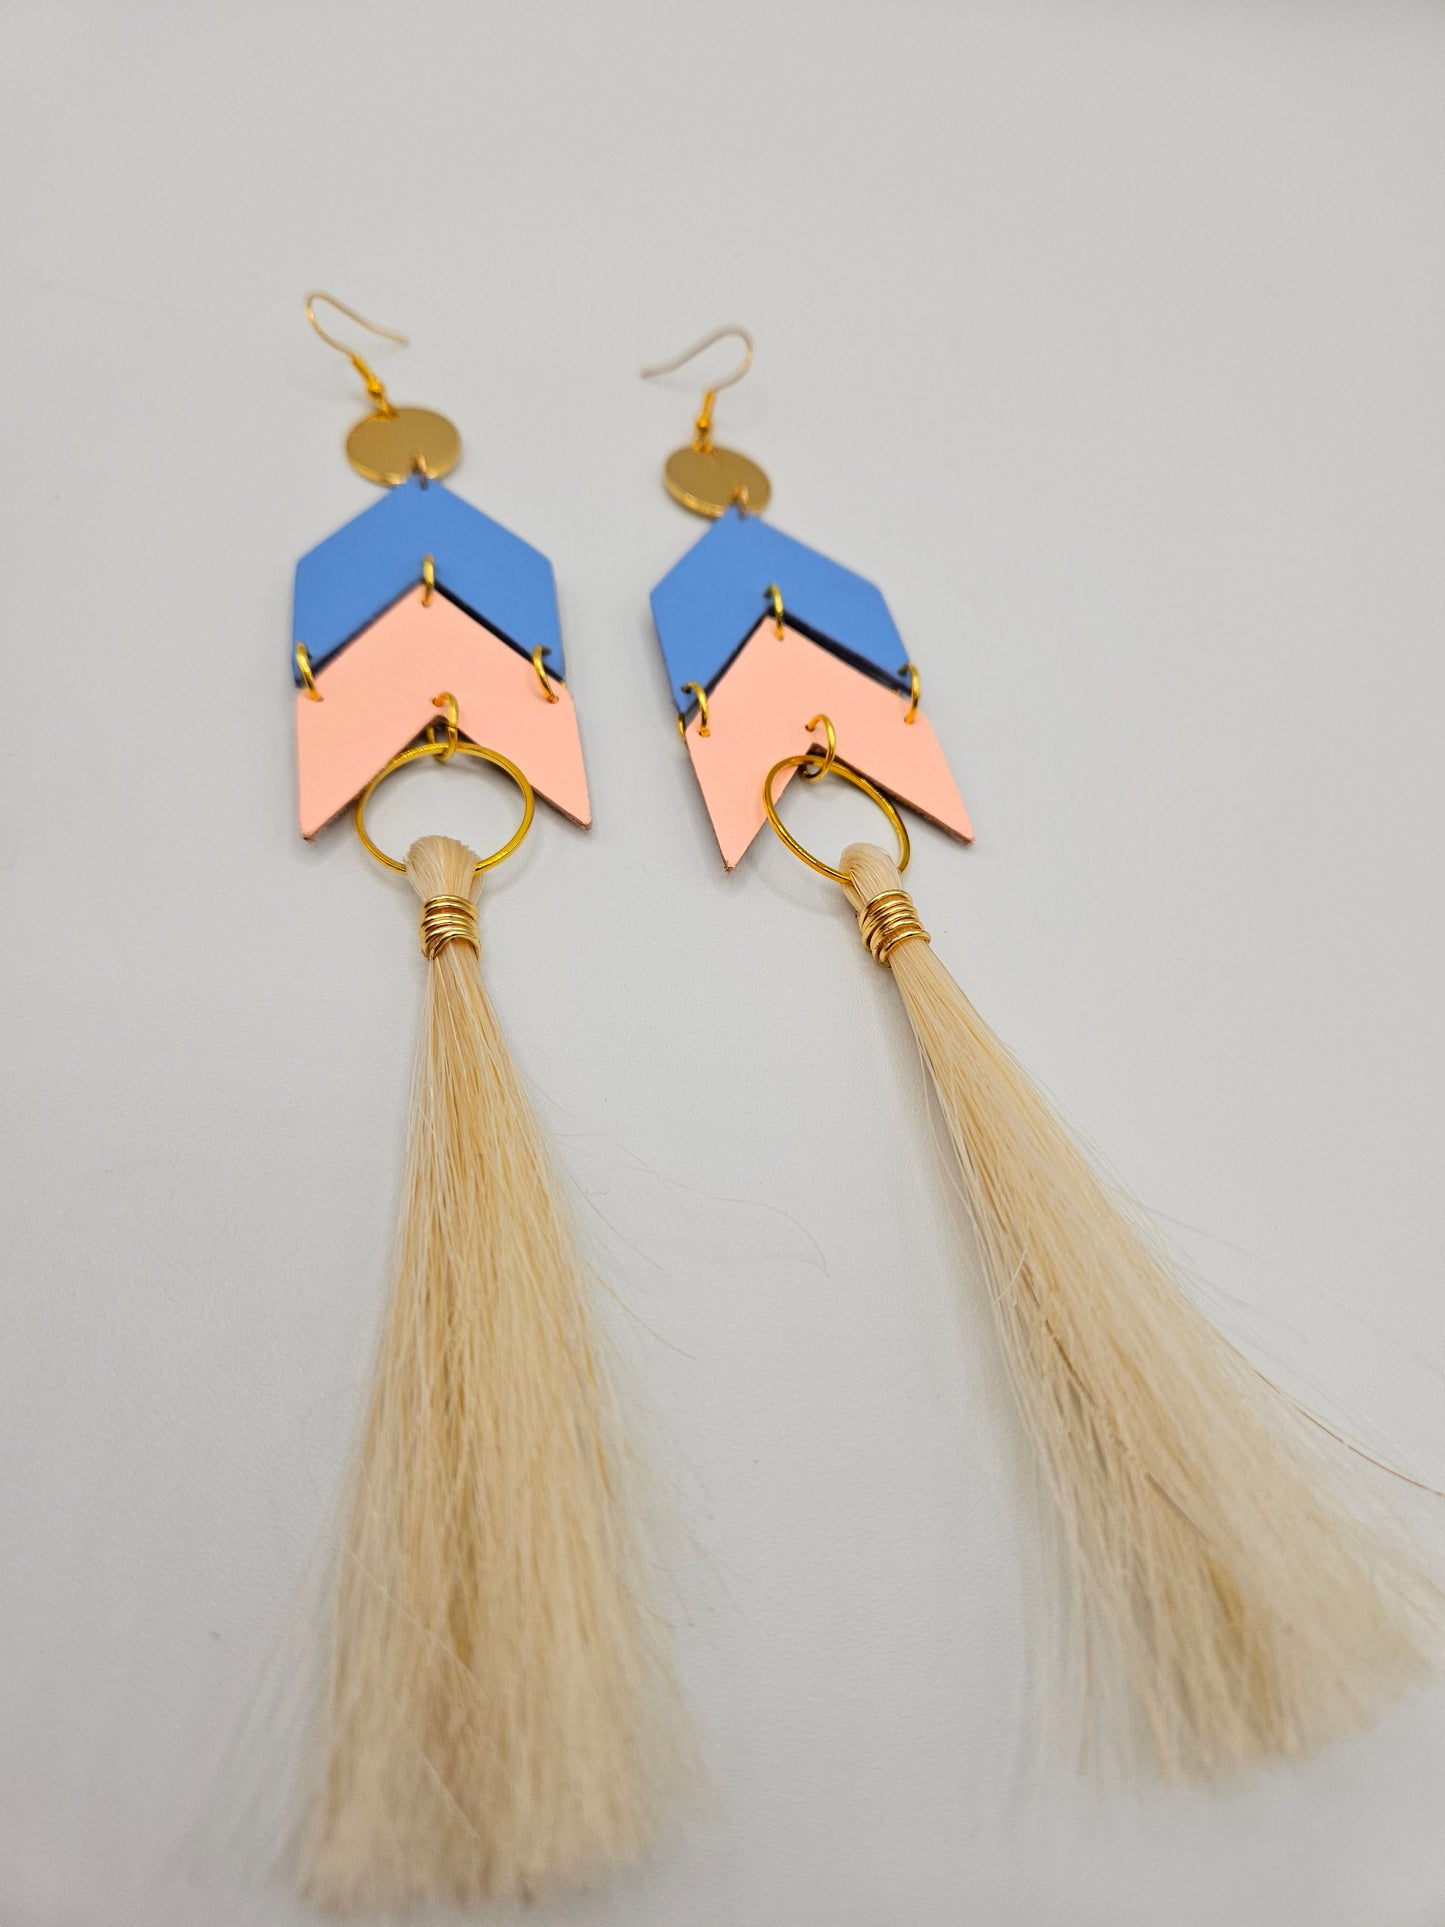 White Horsehair and Leather Chevron Earrings